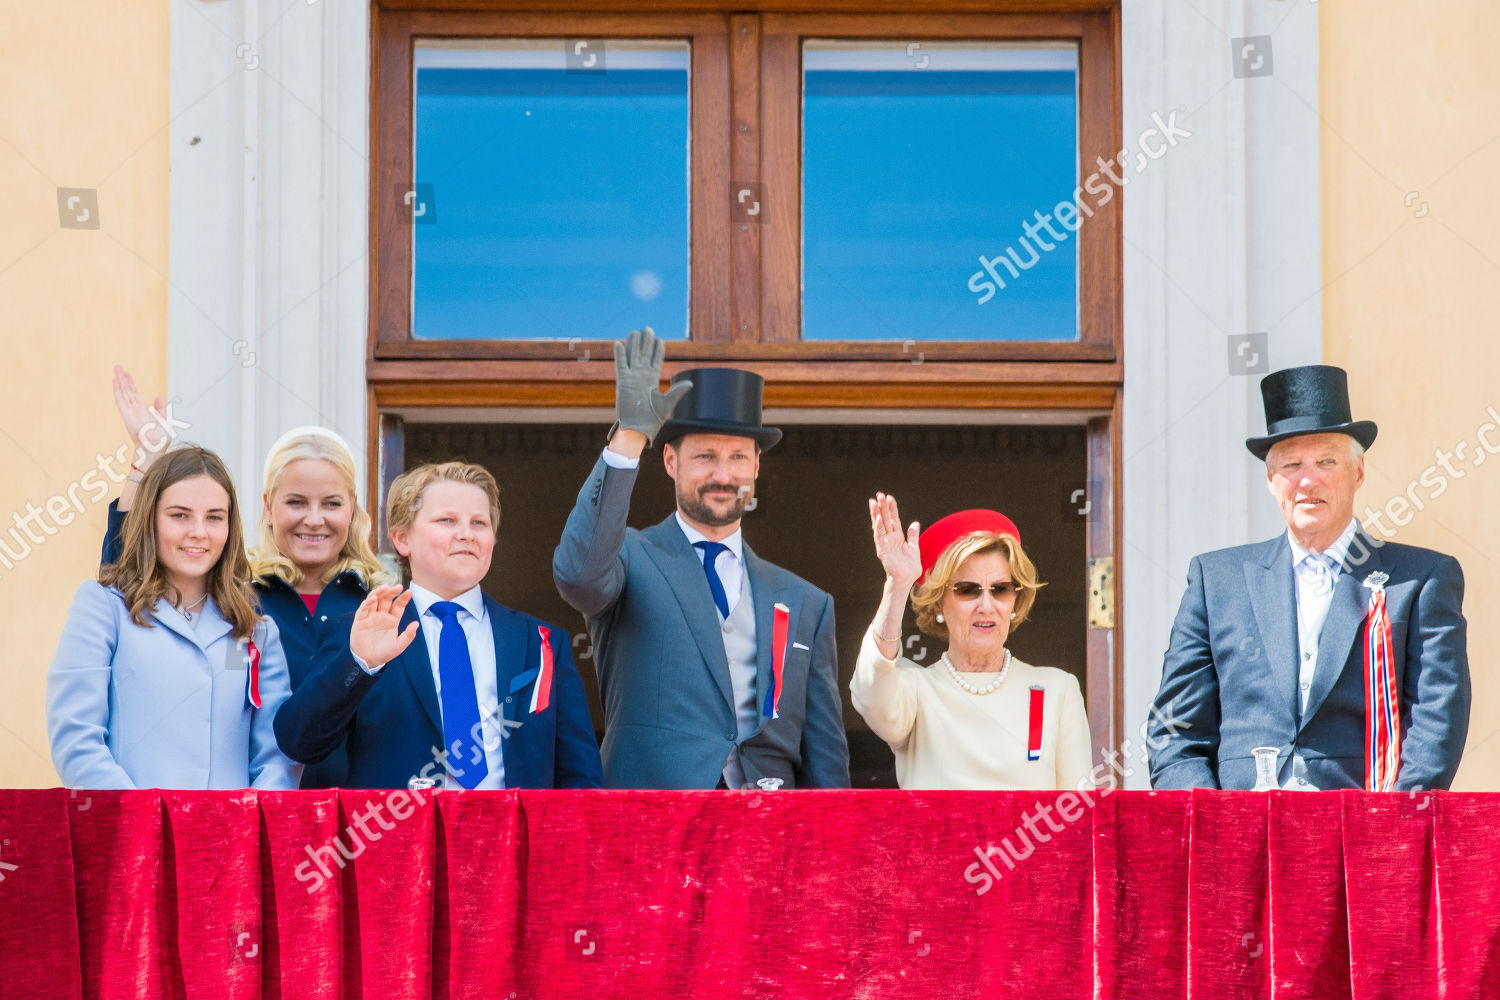 national-day-celebrations-the-royal-palace-oslo-norway-shutterstock-editorial-10239768aa.jpg